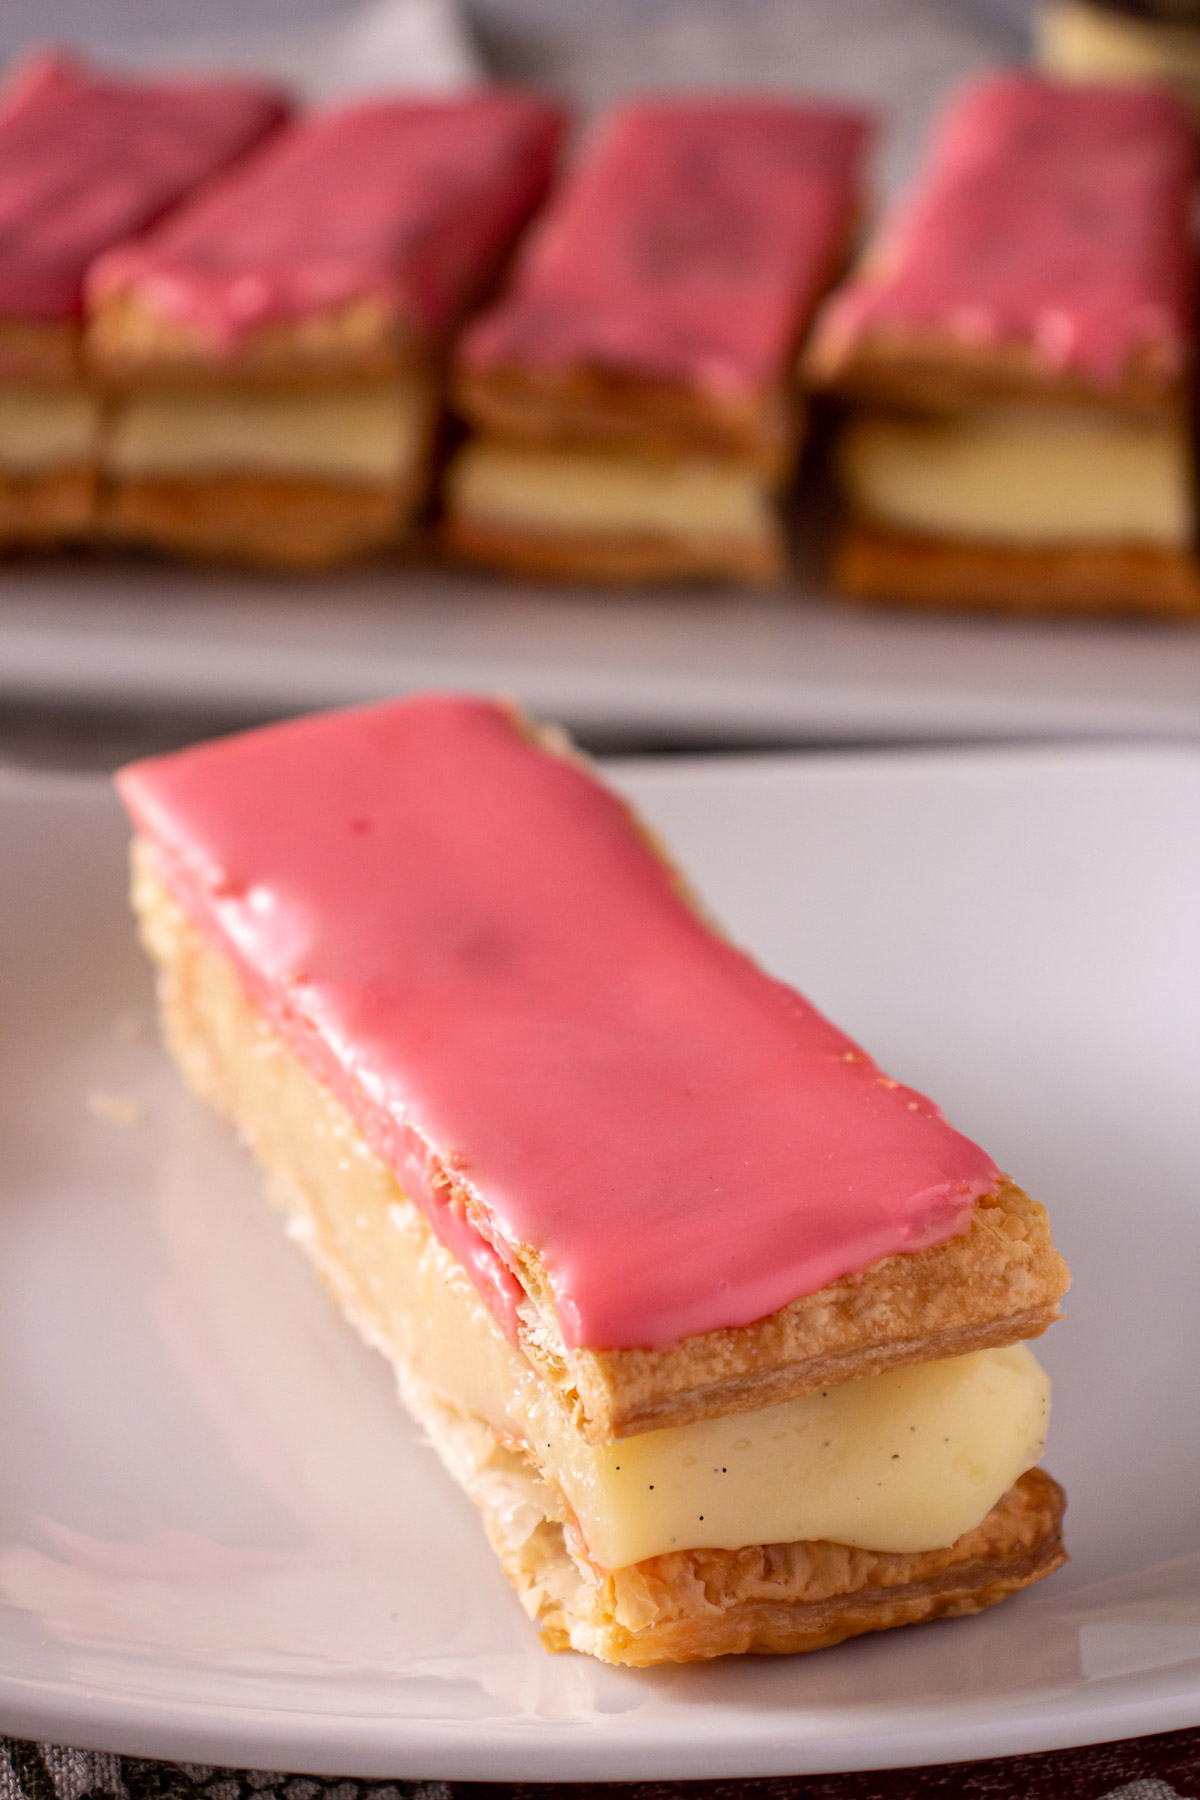 Closeup of a rectangular puff pastry with pastry cream filling and pink glaze on a plate.